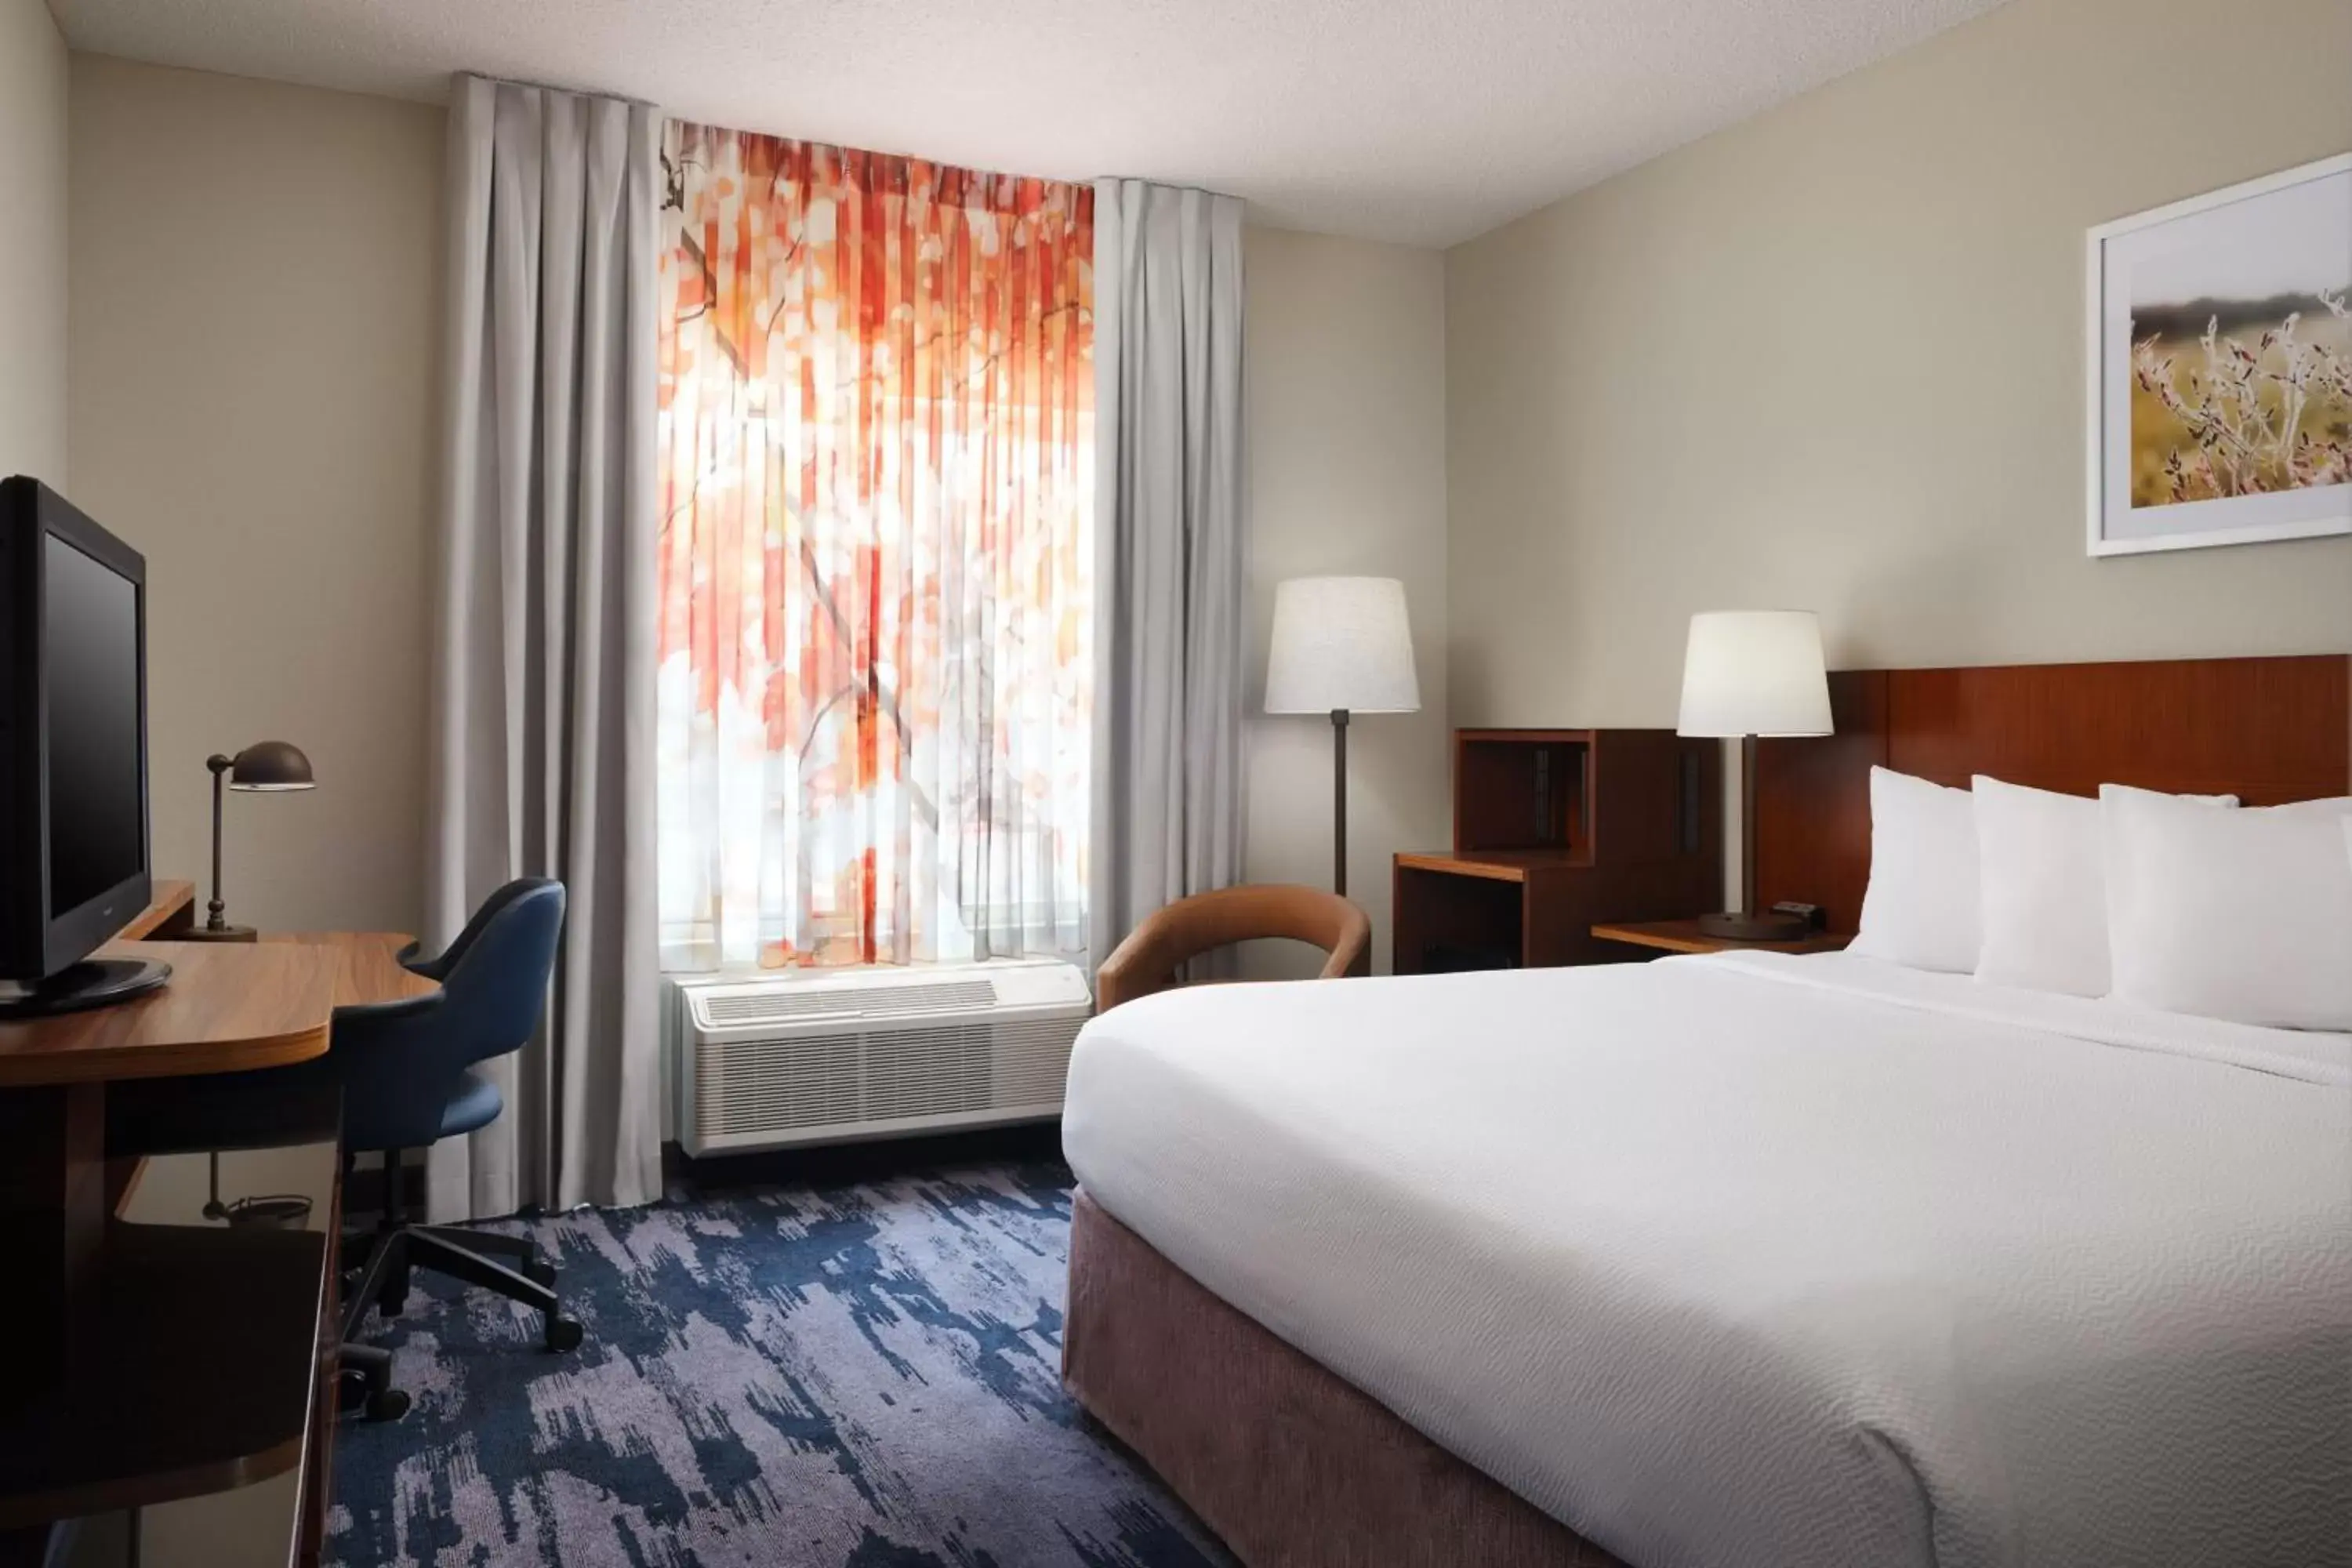 King Room in Fairfield Inn and Suites Austin South